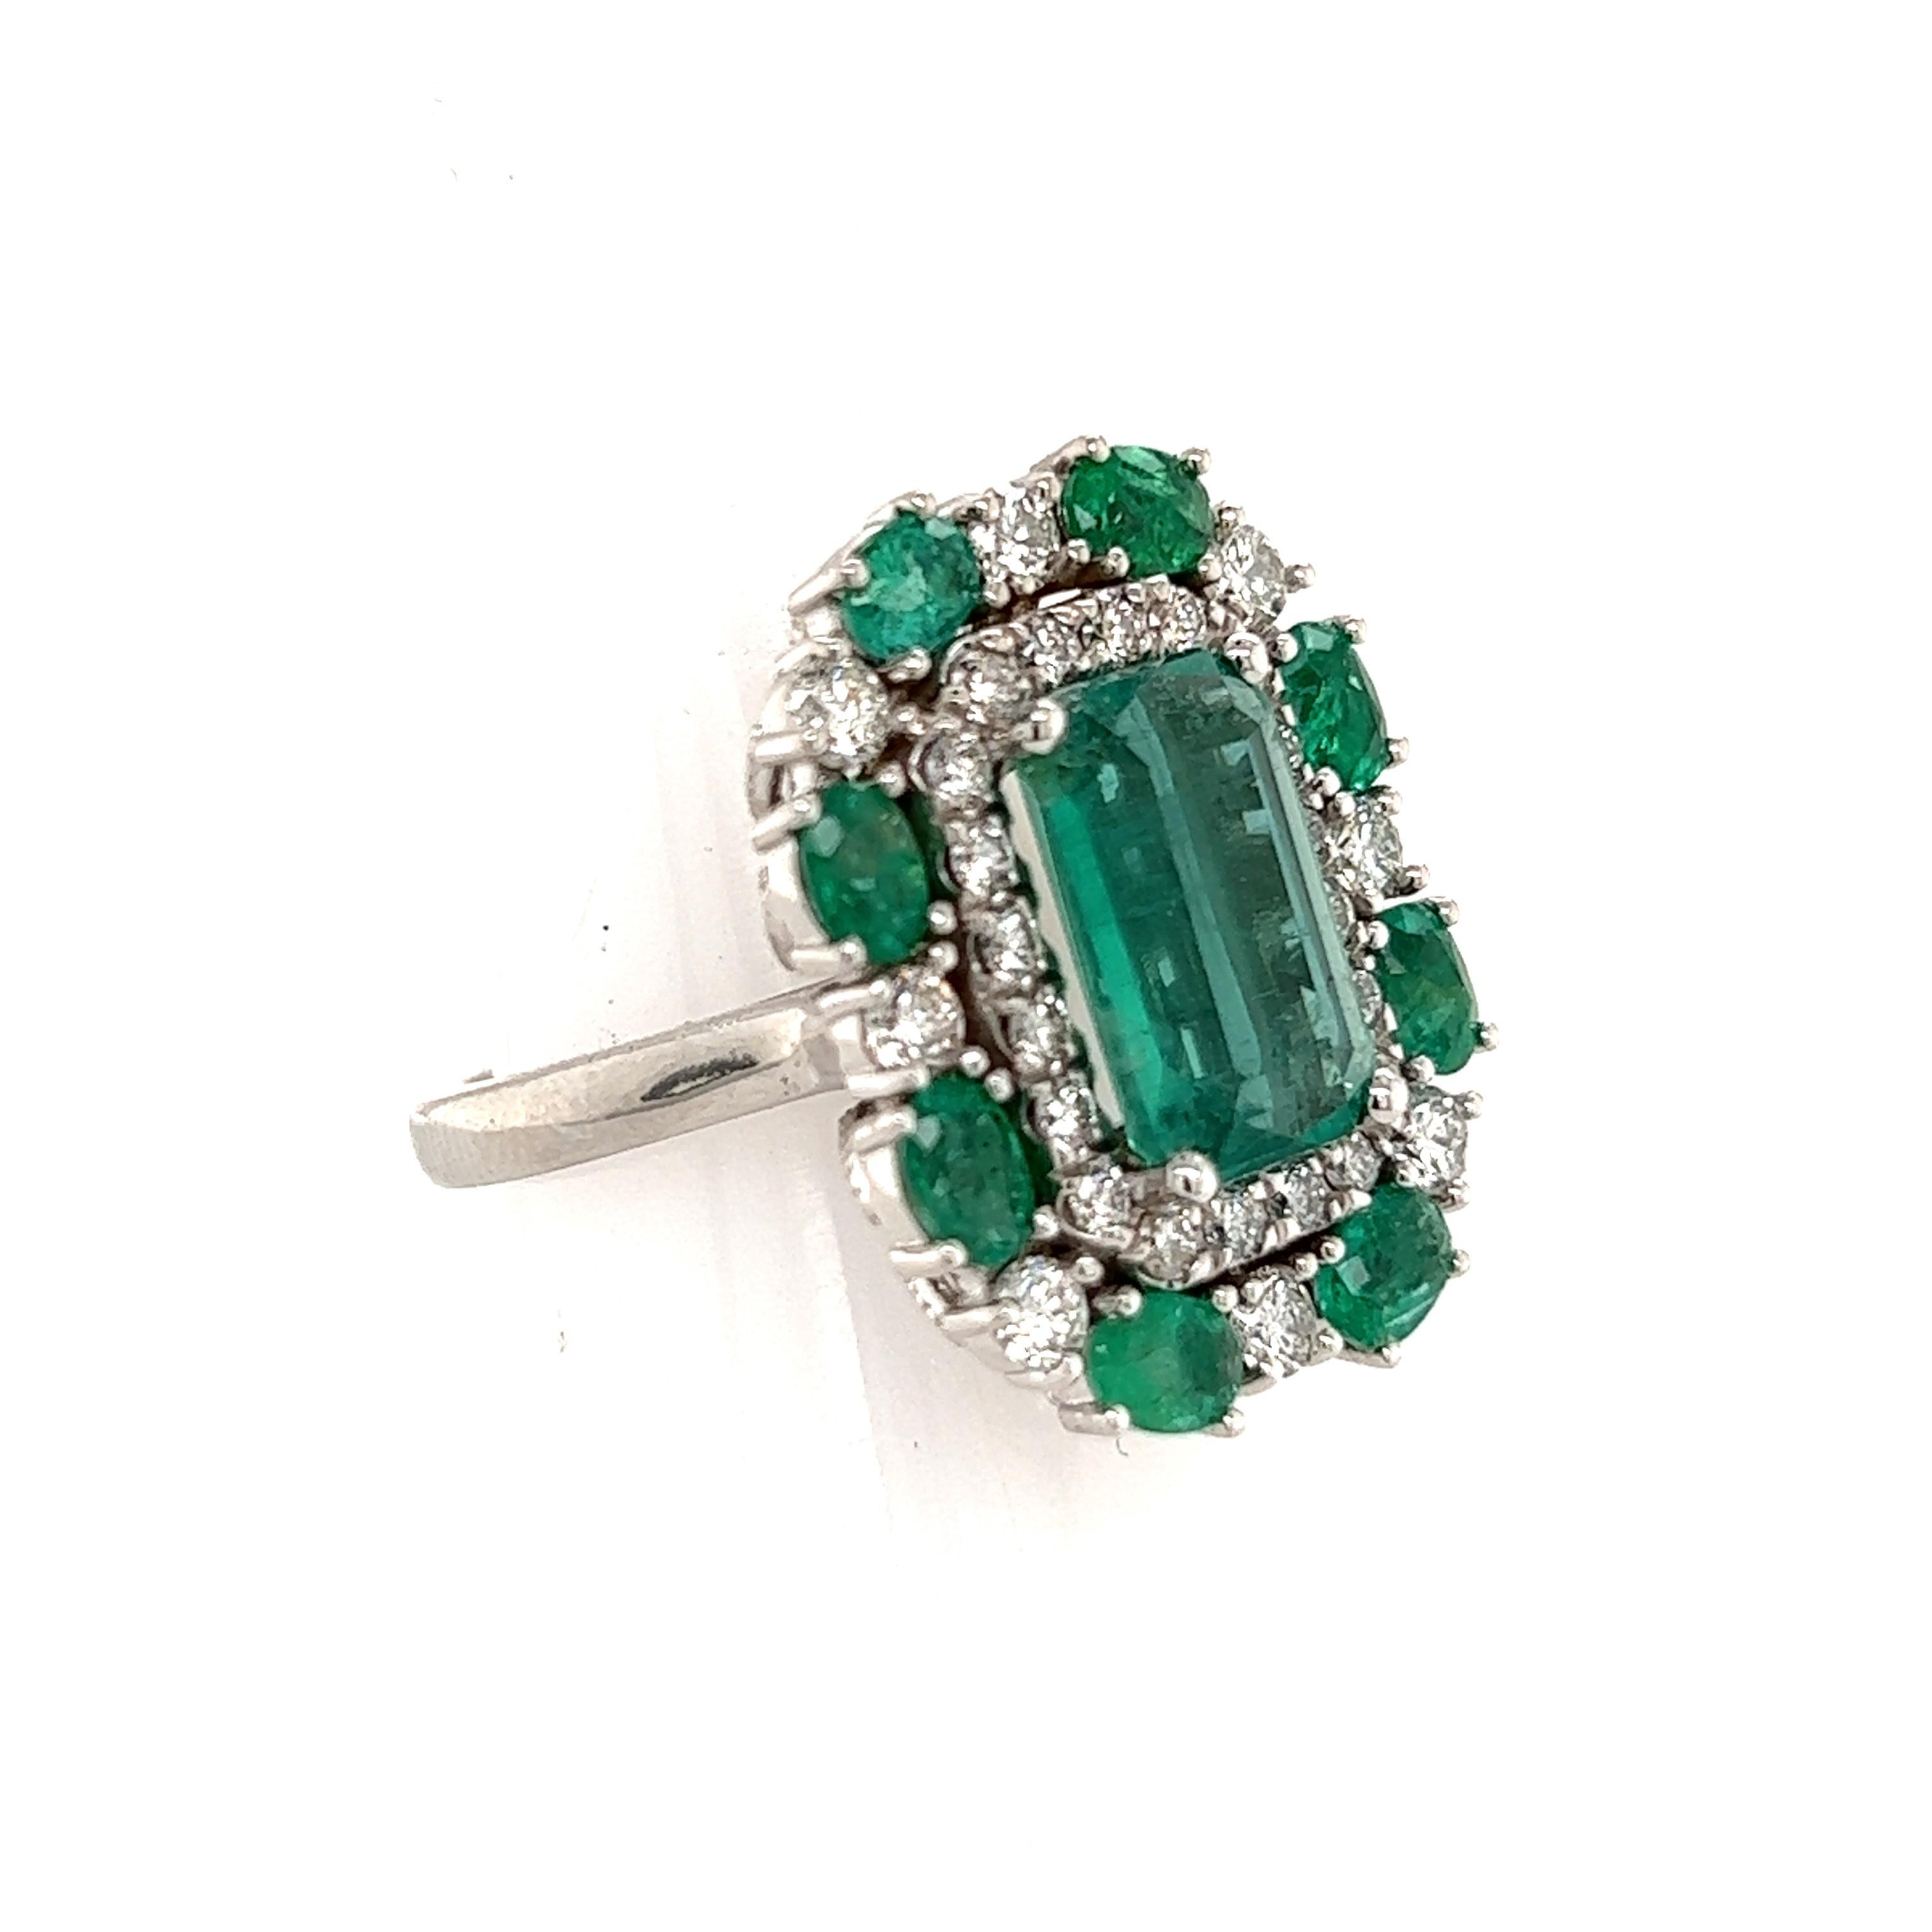 Natural Emerald Diamond Ring 6.5 14k Gold 4.52 TCW GIA Certified For Sale 5